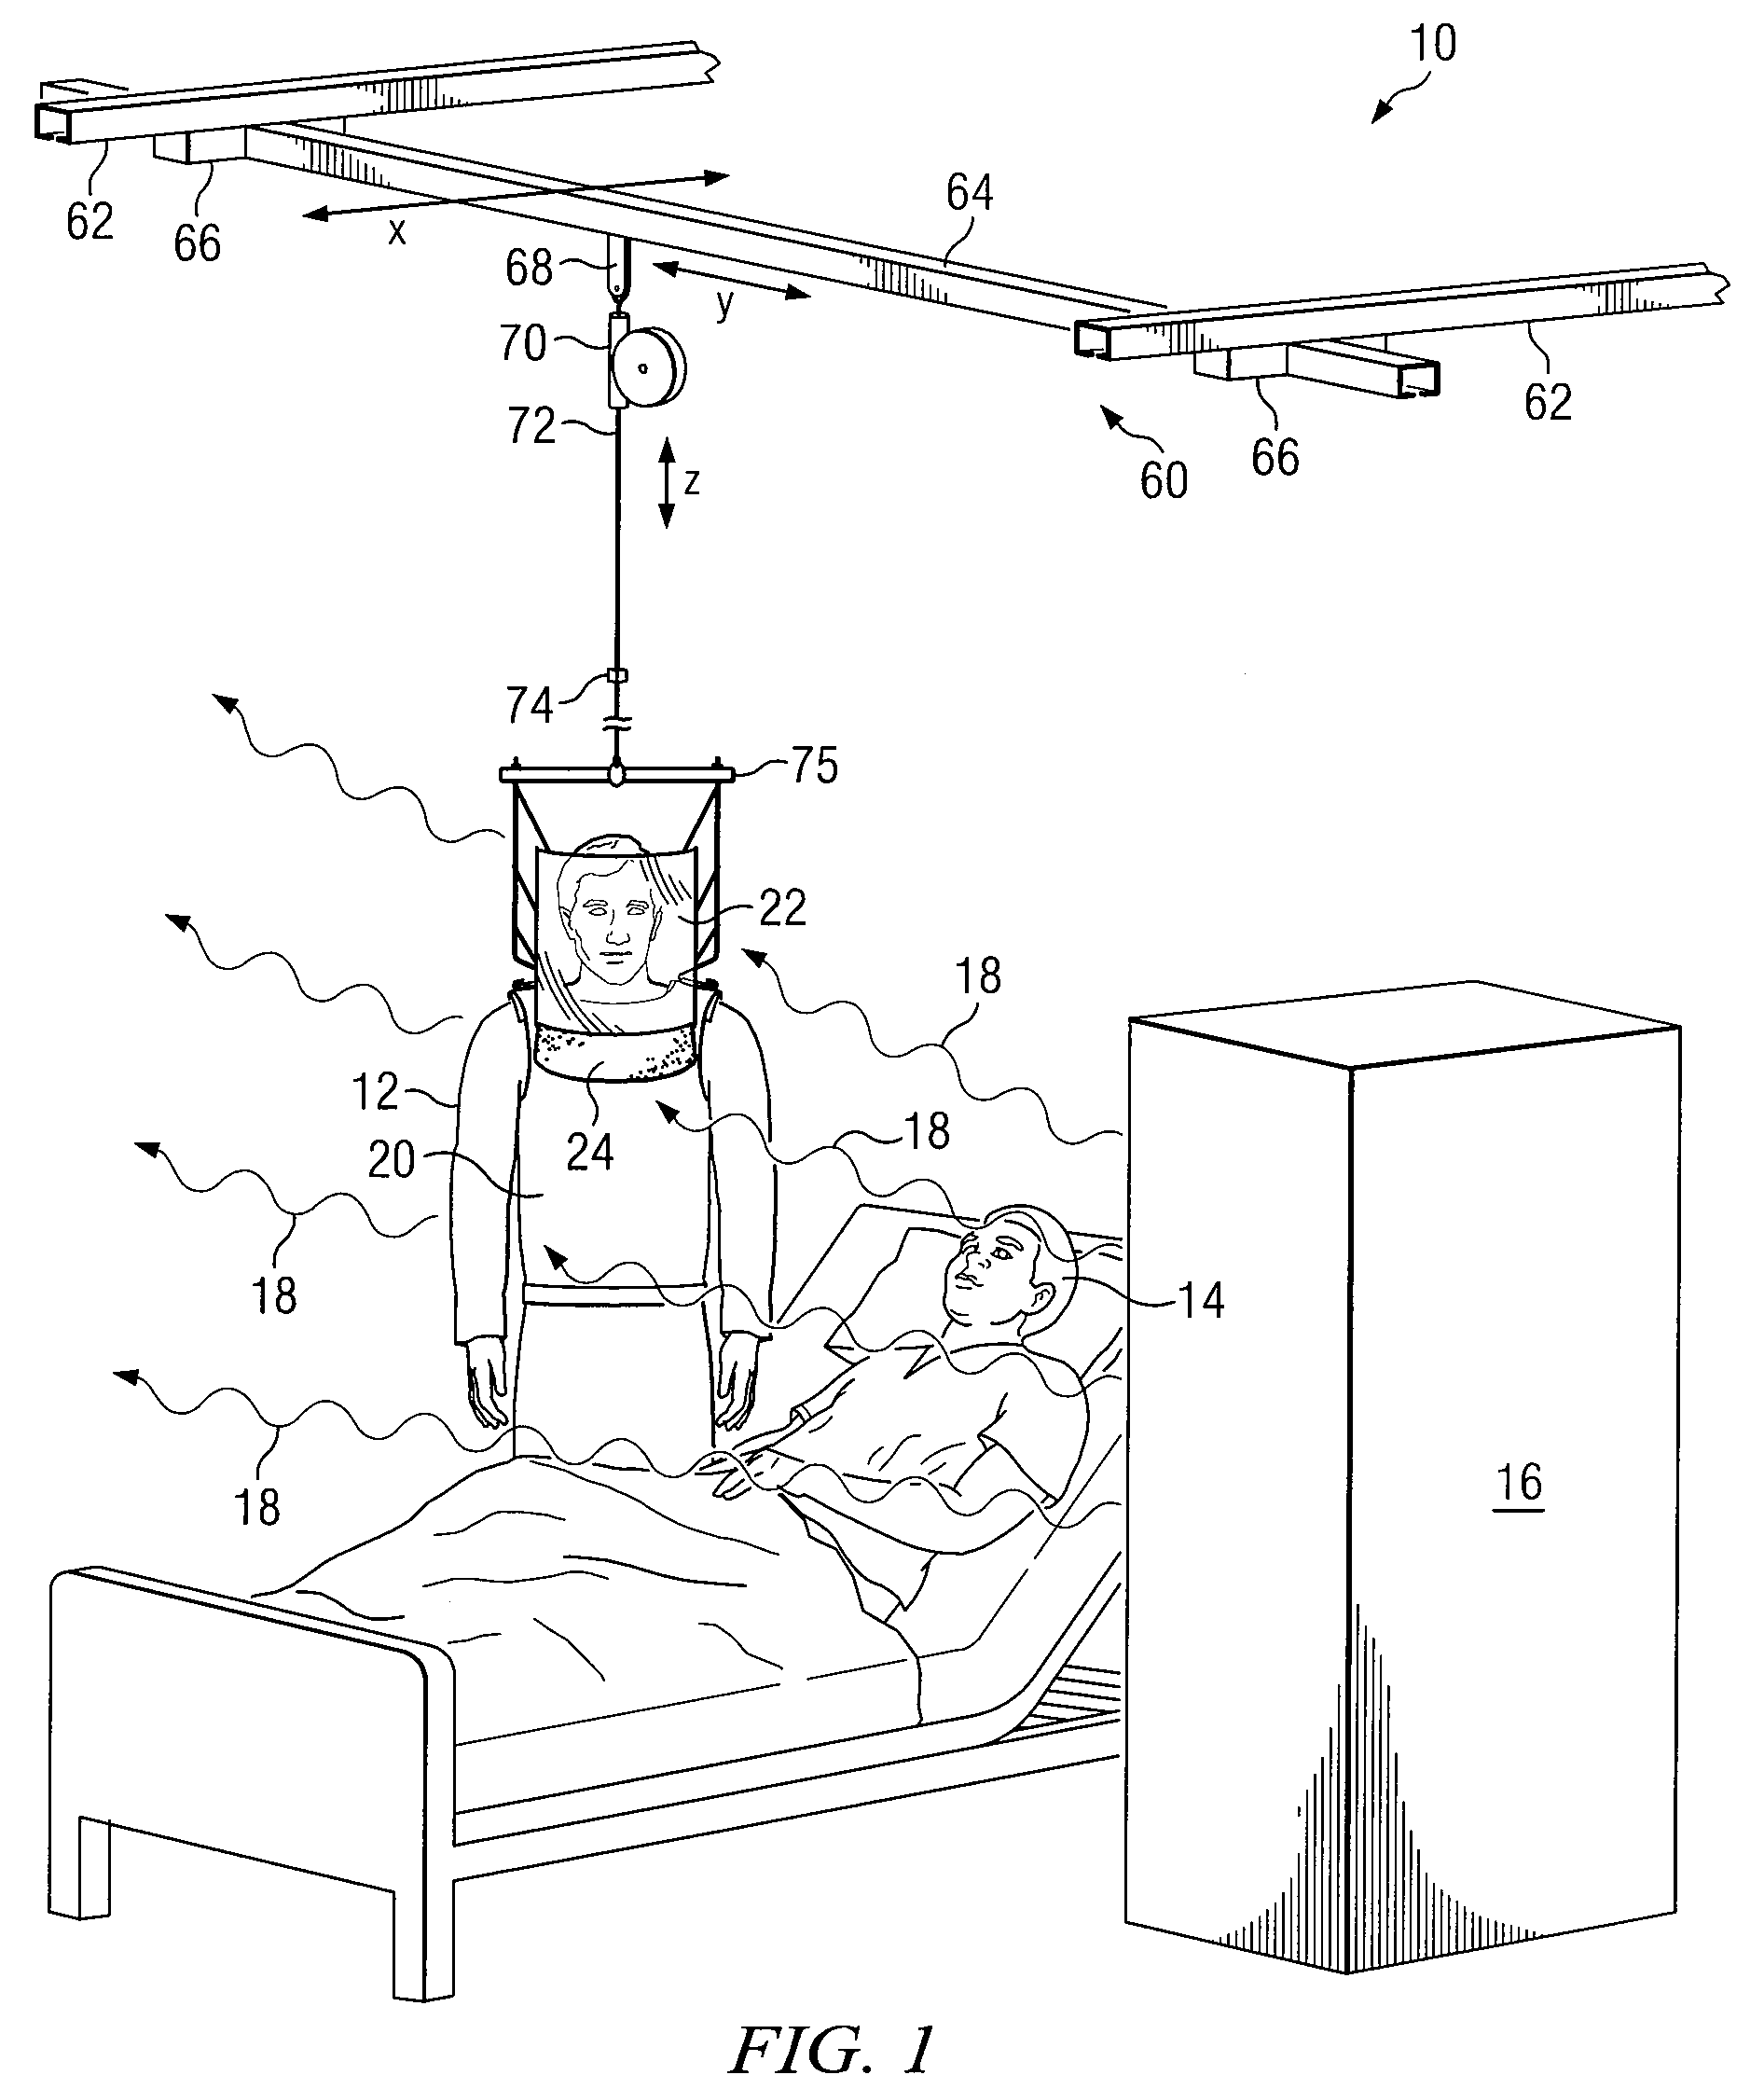 System and method for implementing a suspended personal radiation protection system